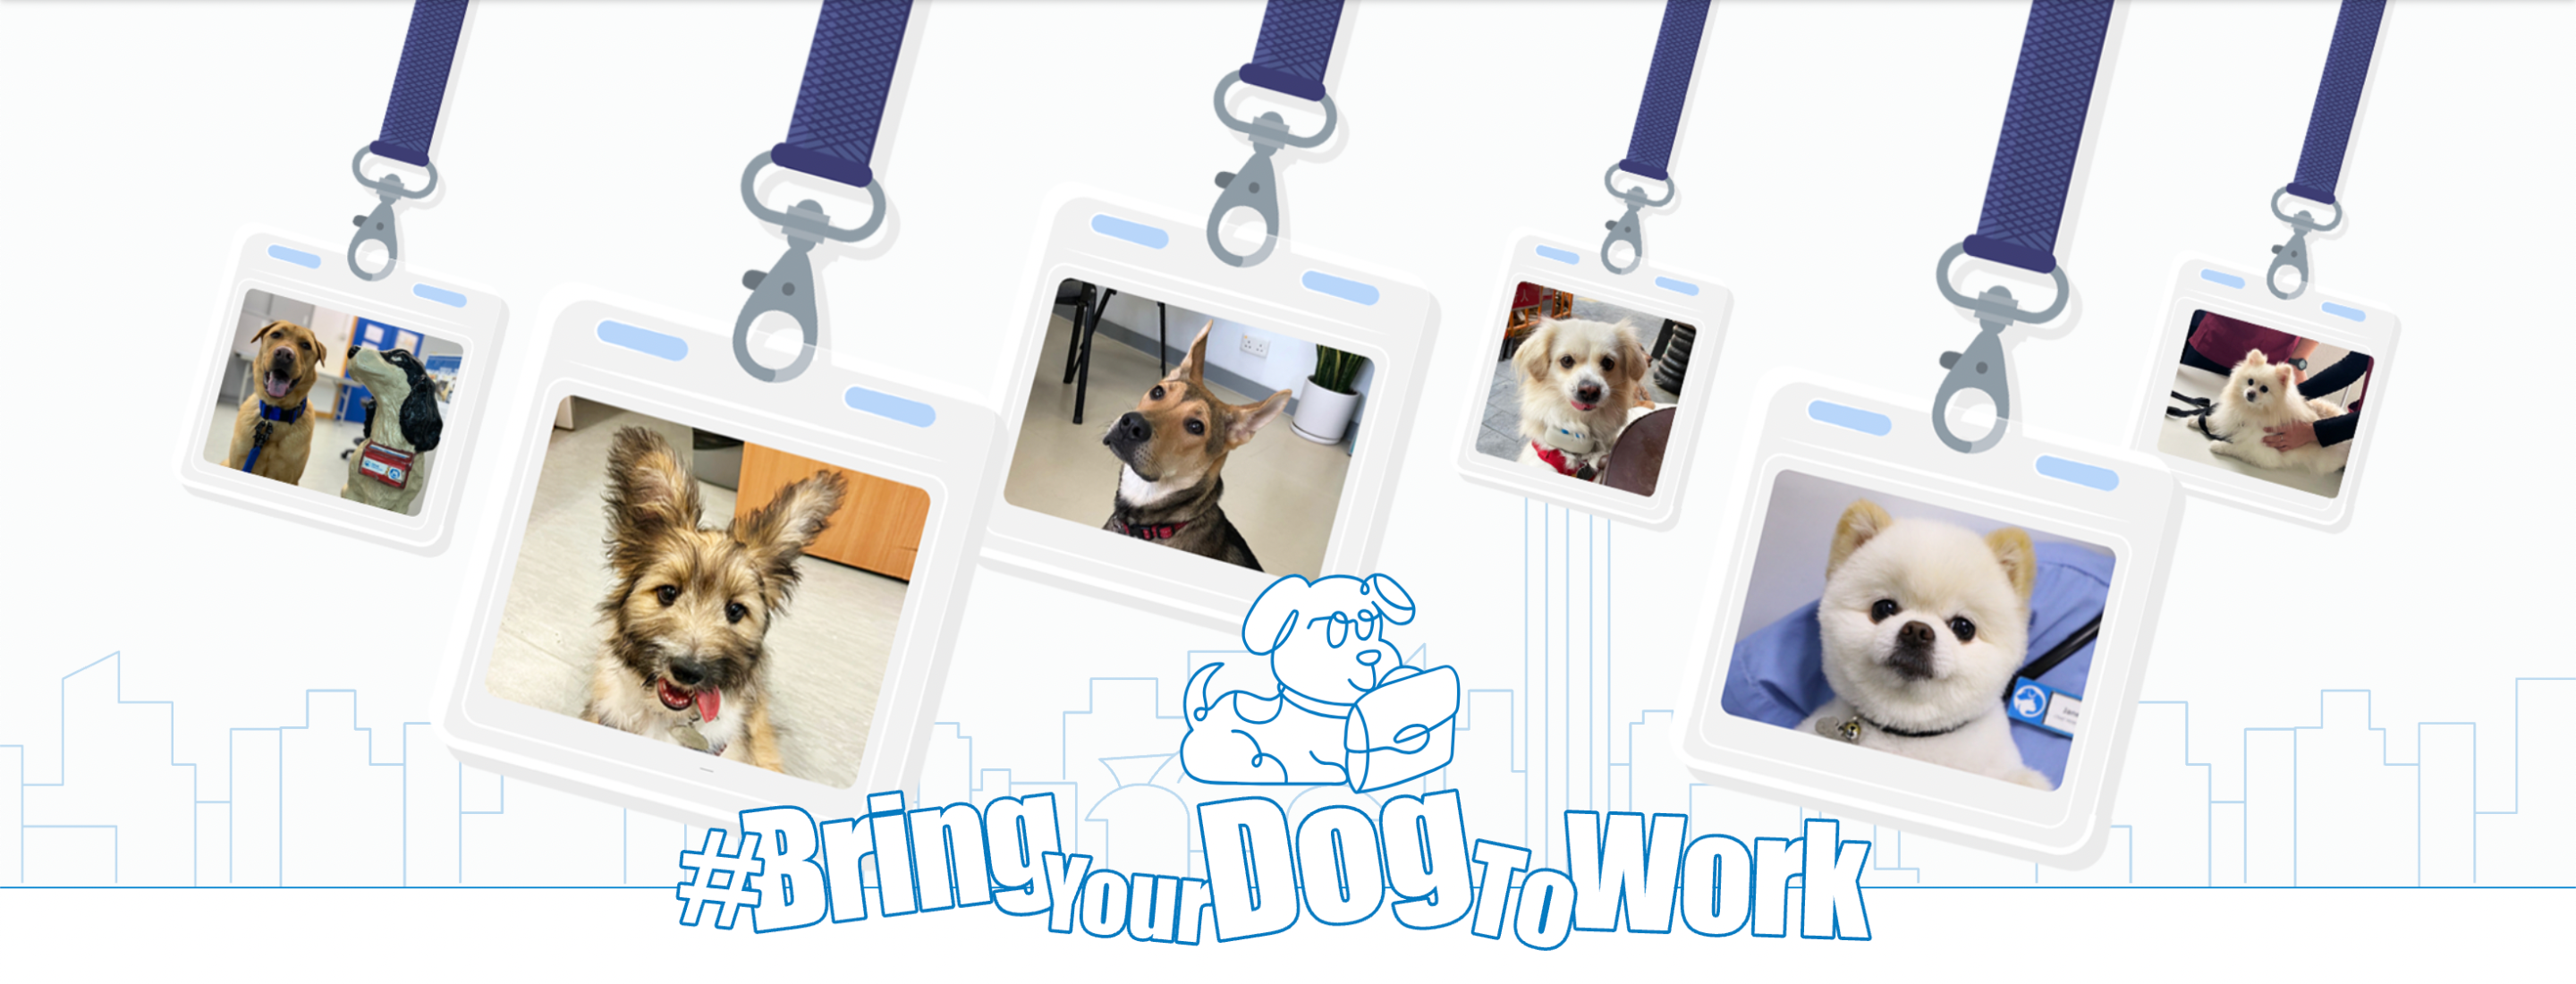 The SPCA Presents “Bring Your Dog to Work” Promoting a dog-friendly workplace culture throughout Hong Kong